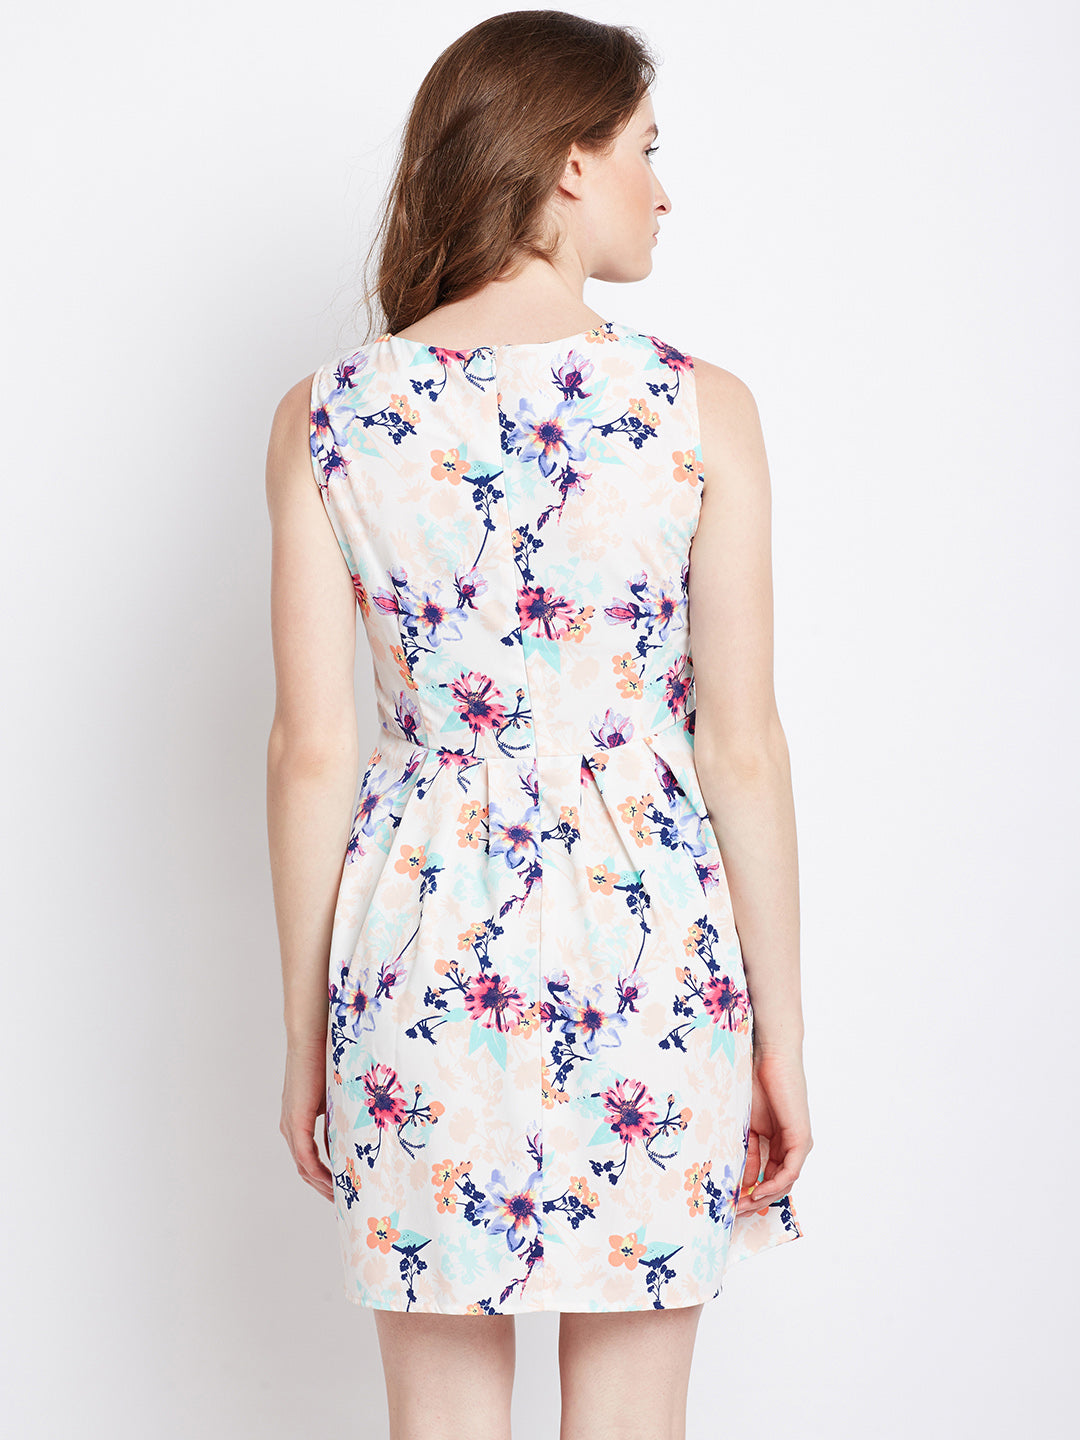 Off-White Printed Fit and Flare Dress - Berrylush